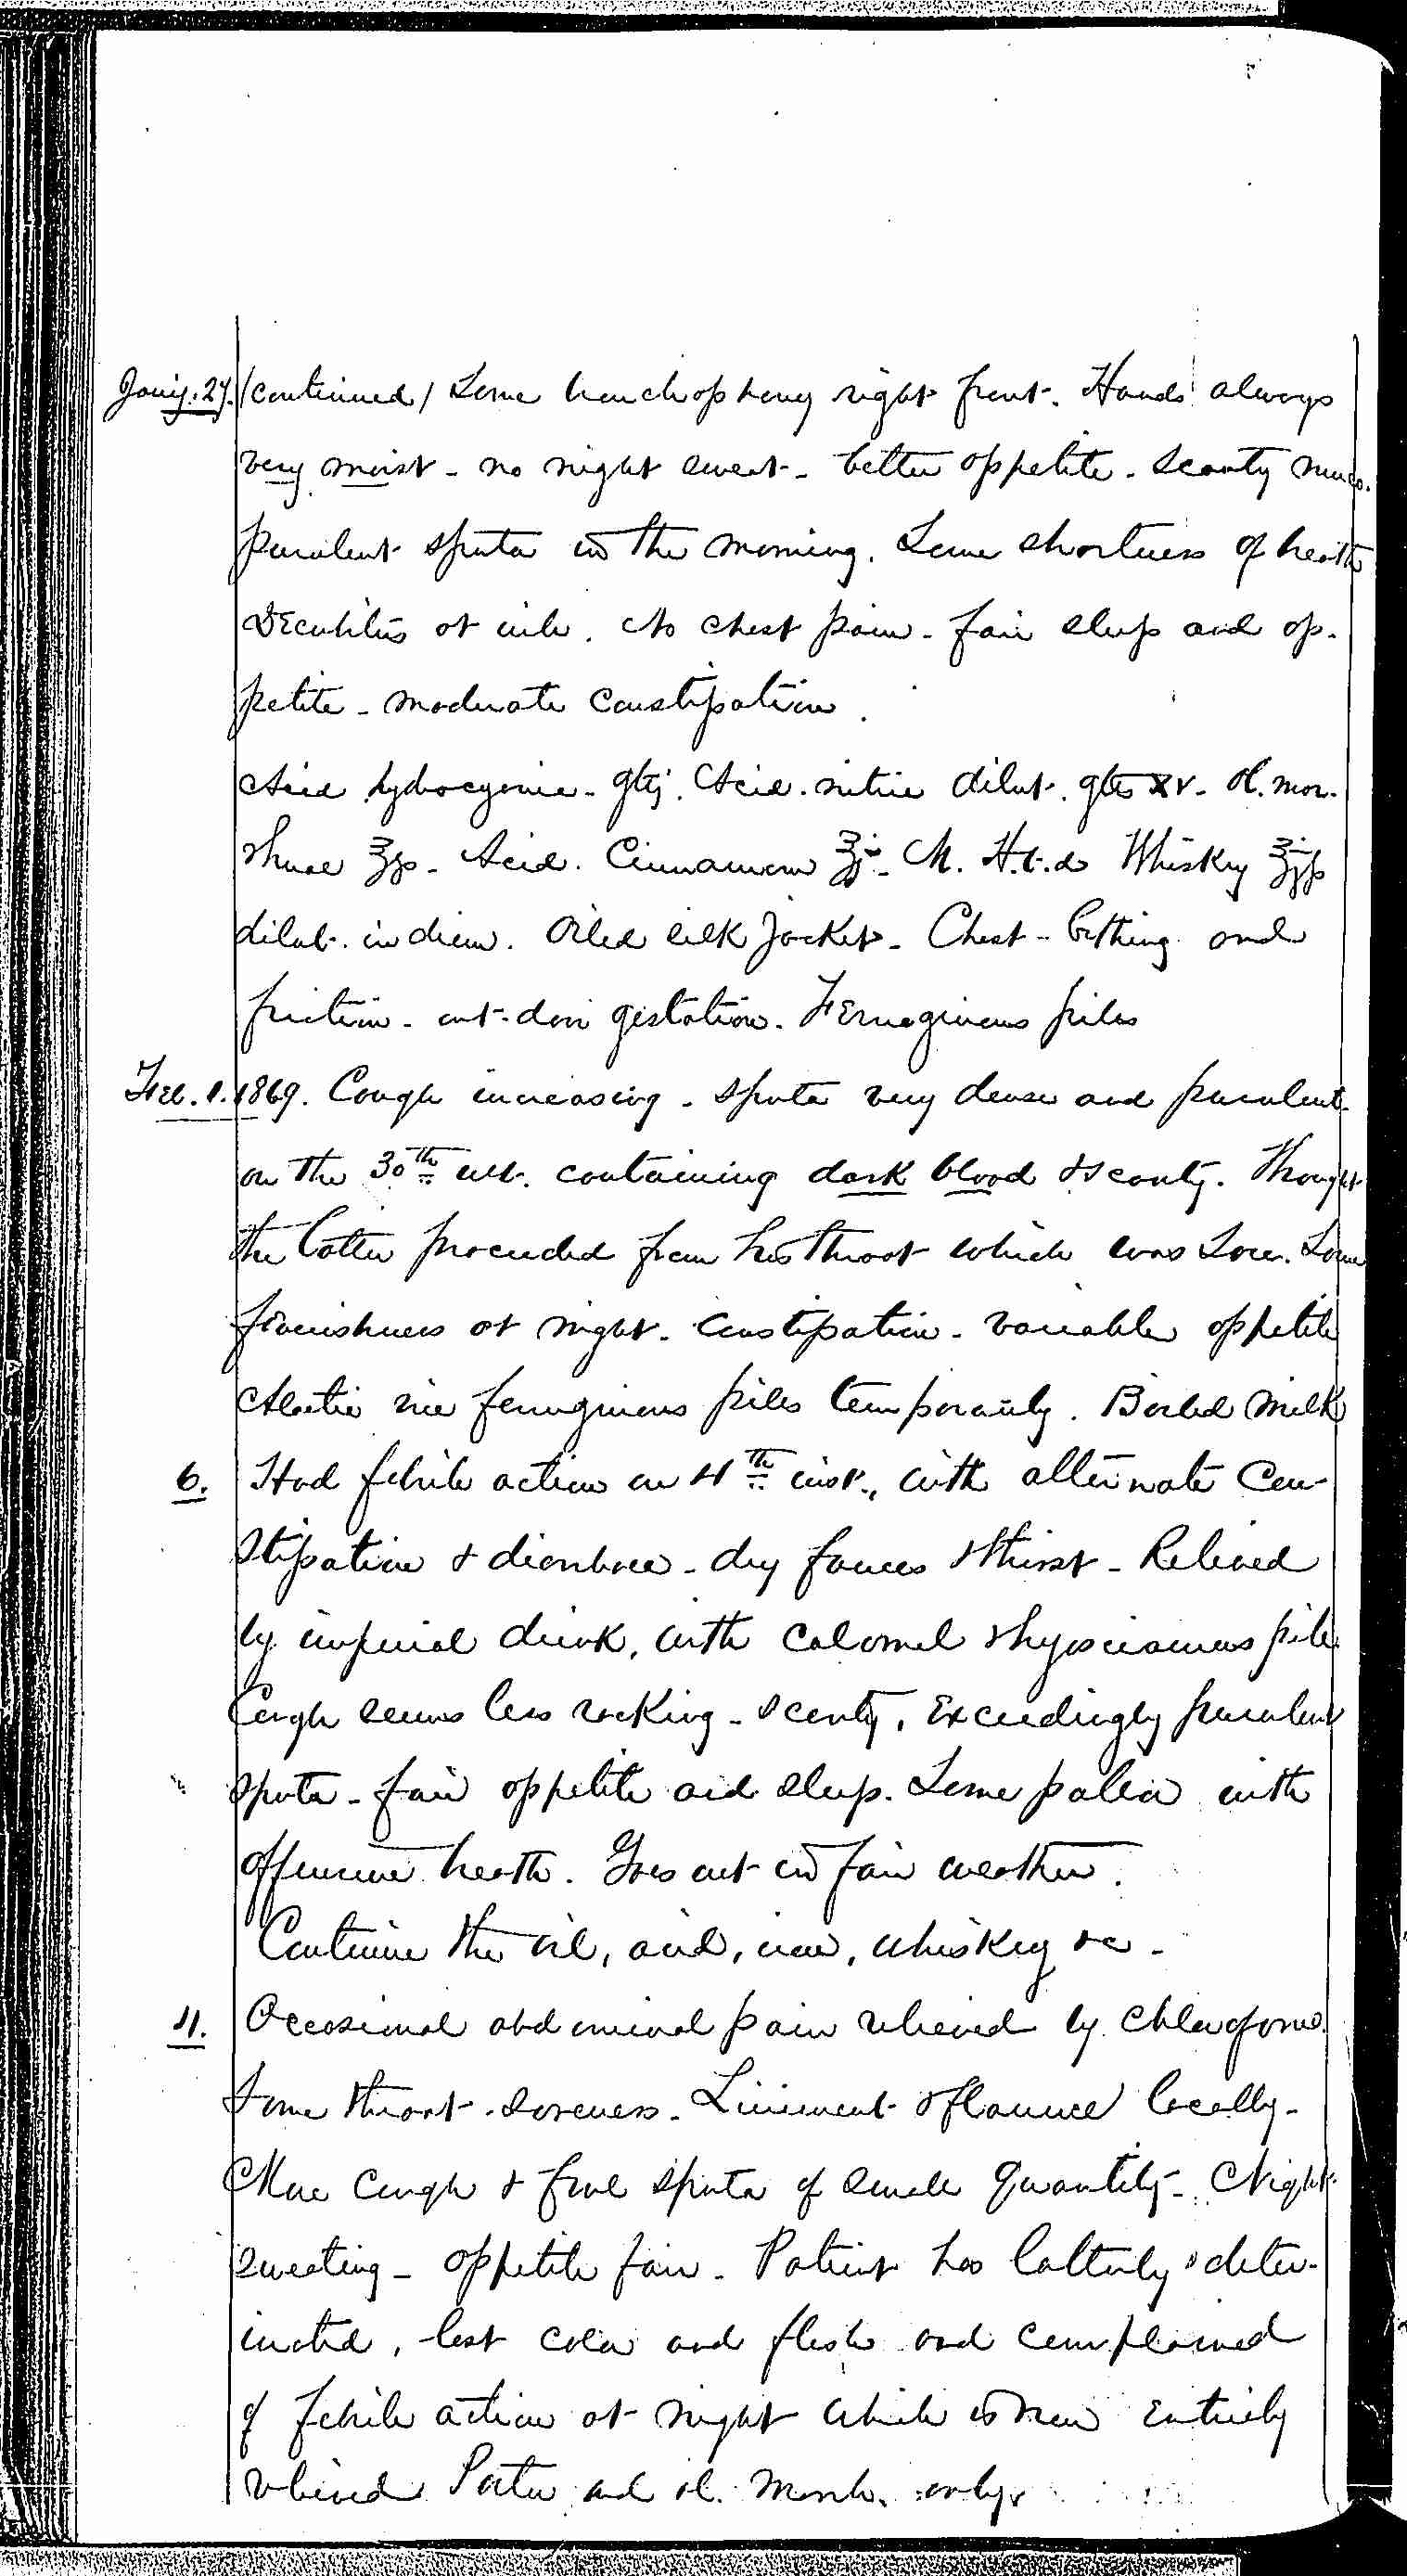 Entry for Peter C. Cheeks (page 6 of 16) in the log Hospital Tickets and Case Papers - Naval Hospital - Washington, D.C. - 1868-69